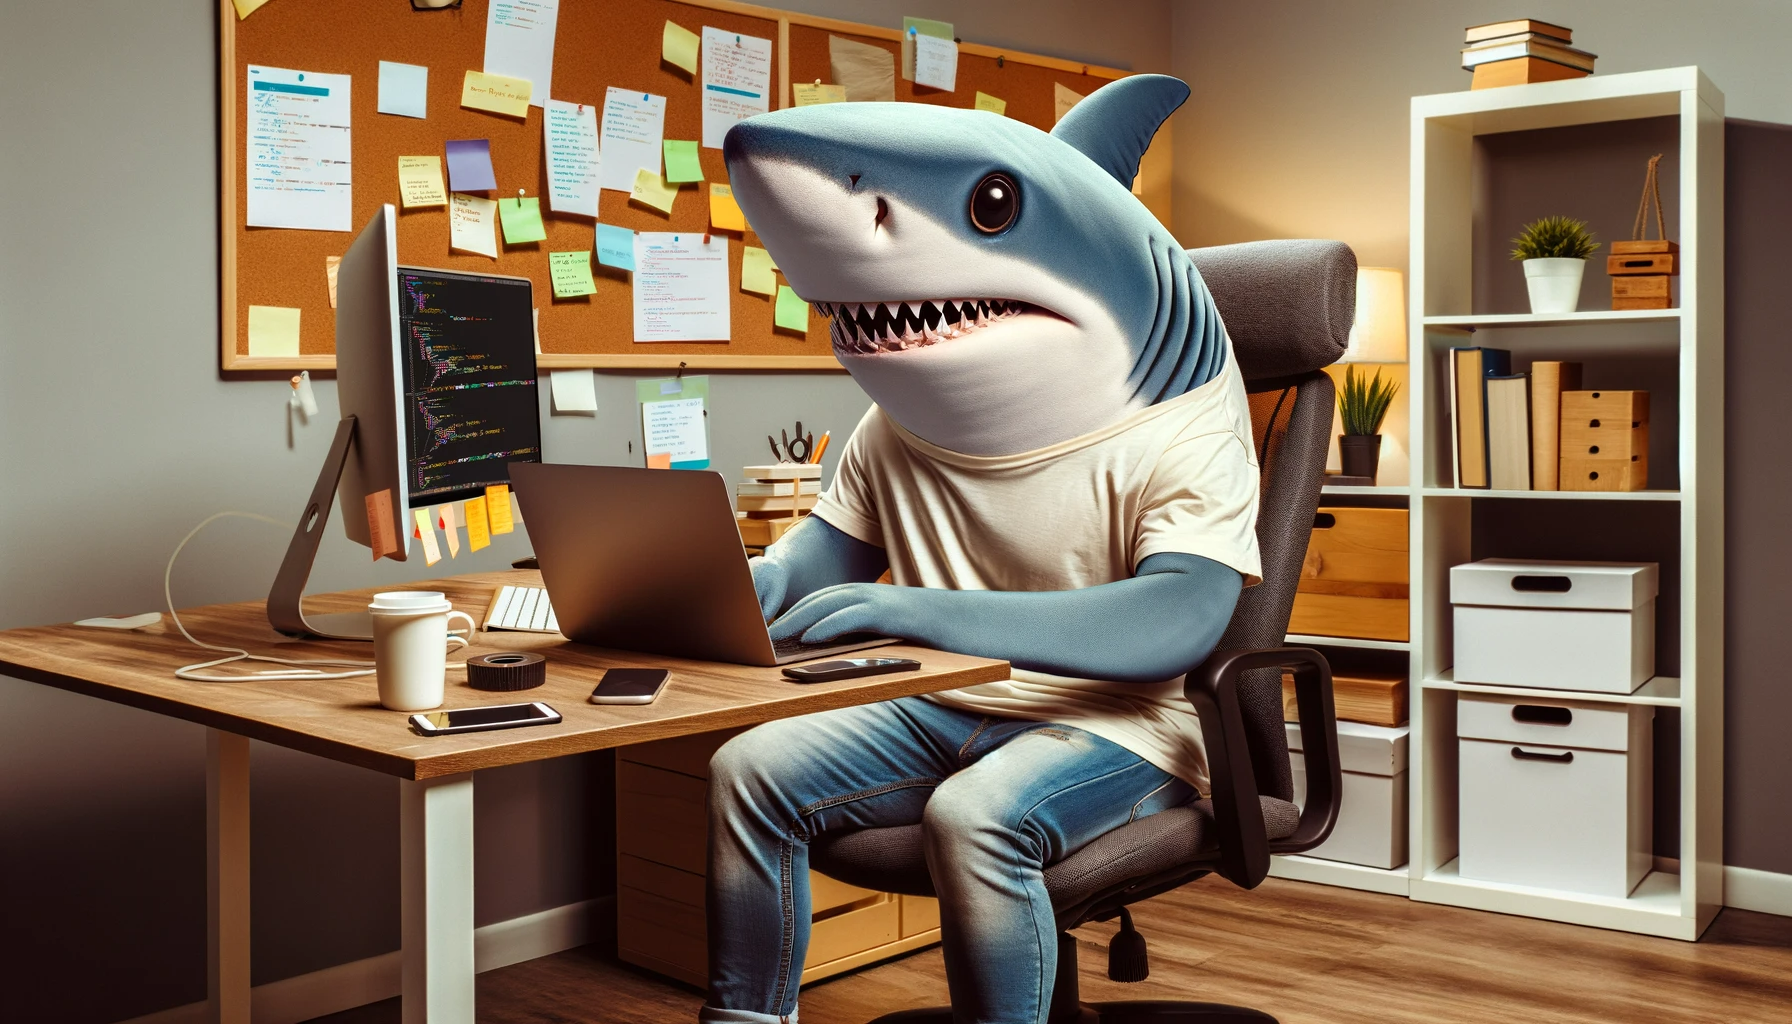 Code Shark: A shark sitting and programming on a laptop like a developer, drinking a cup of coffee